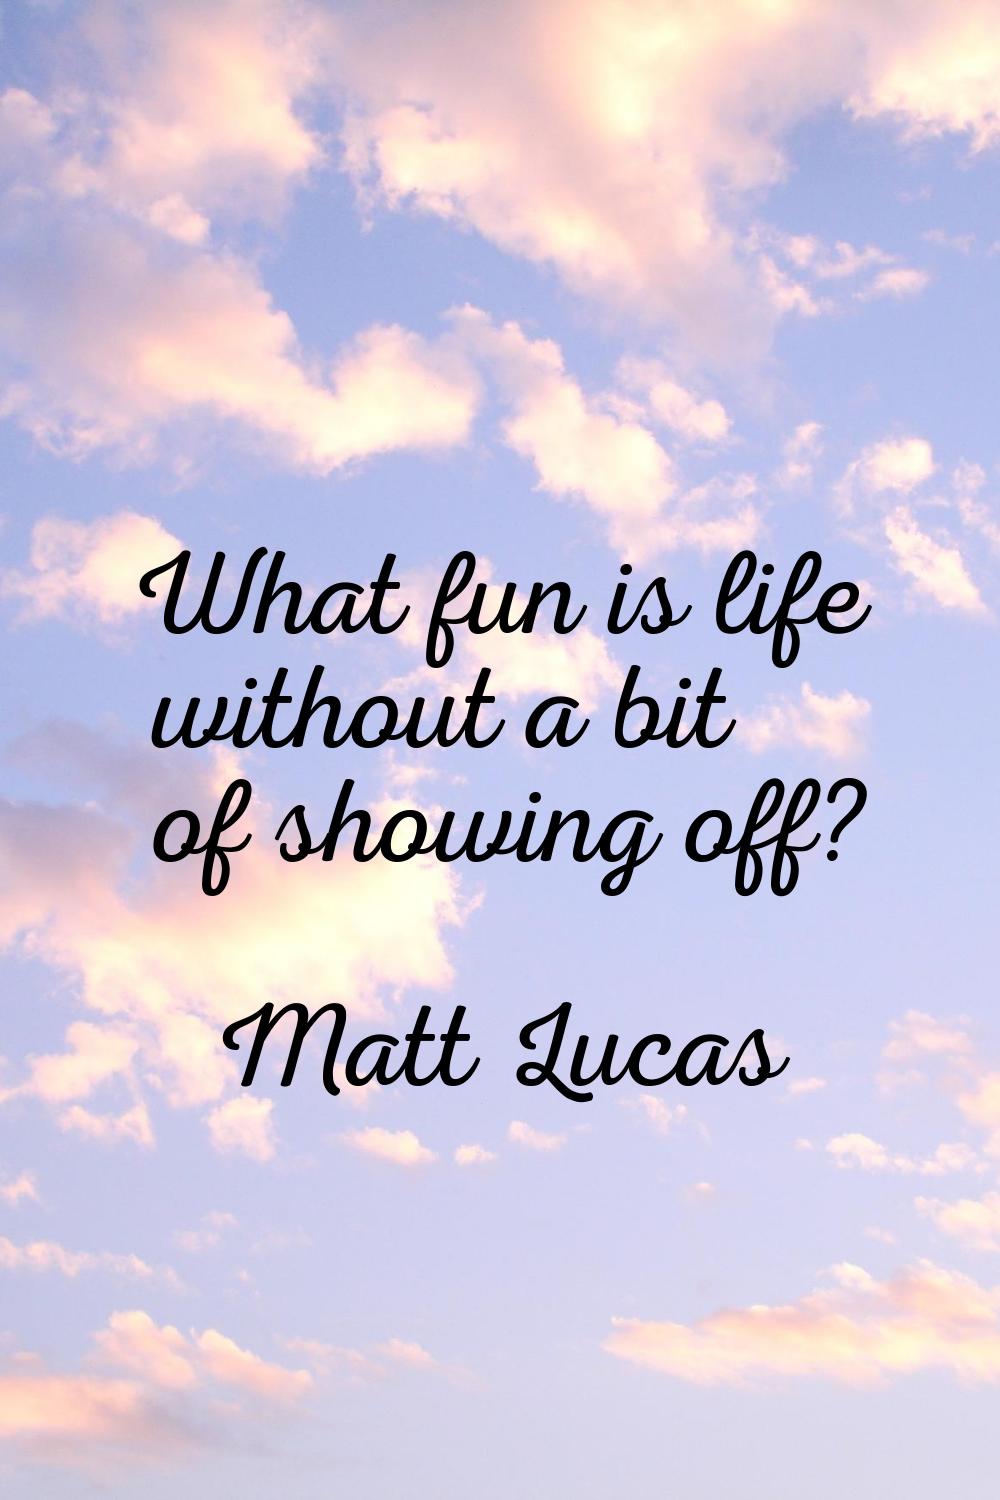 What fun is life without a bit of showing off?